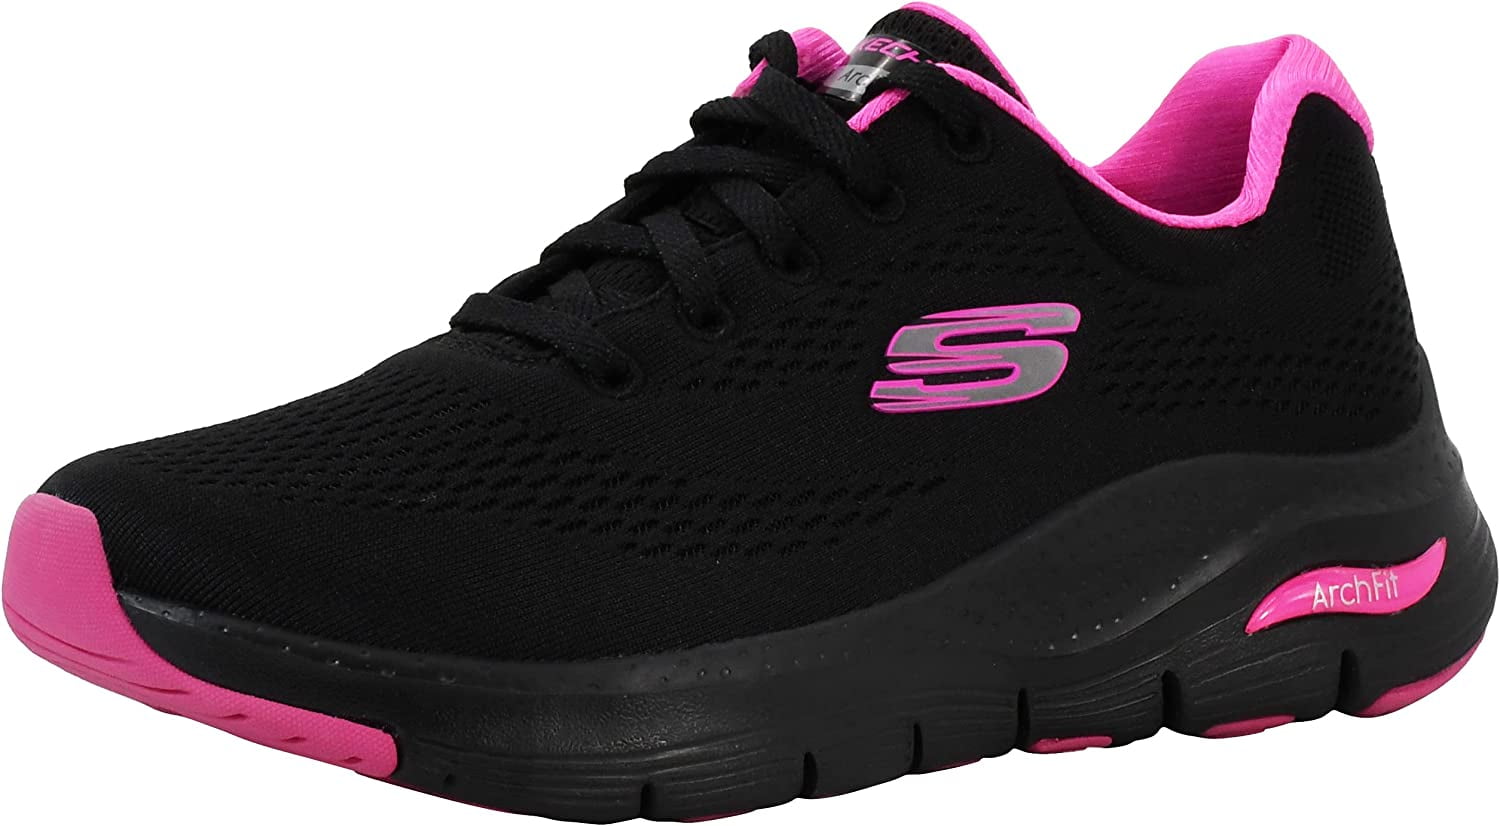 Womens Skechers Arch Fit Sunny Outlook Sports Shoe Navy